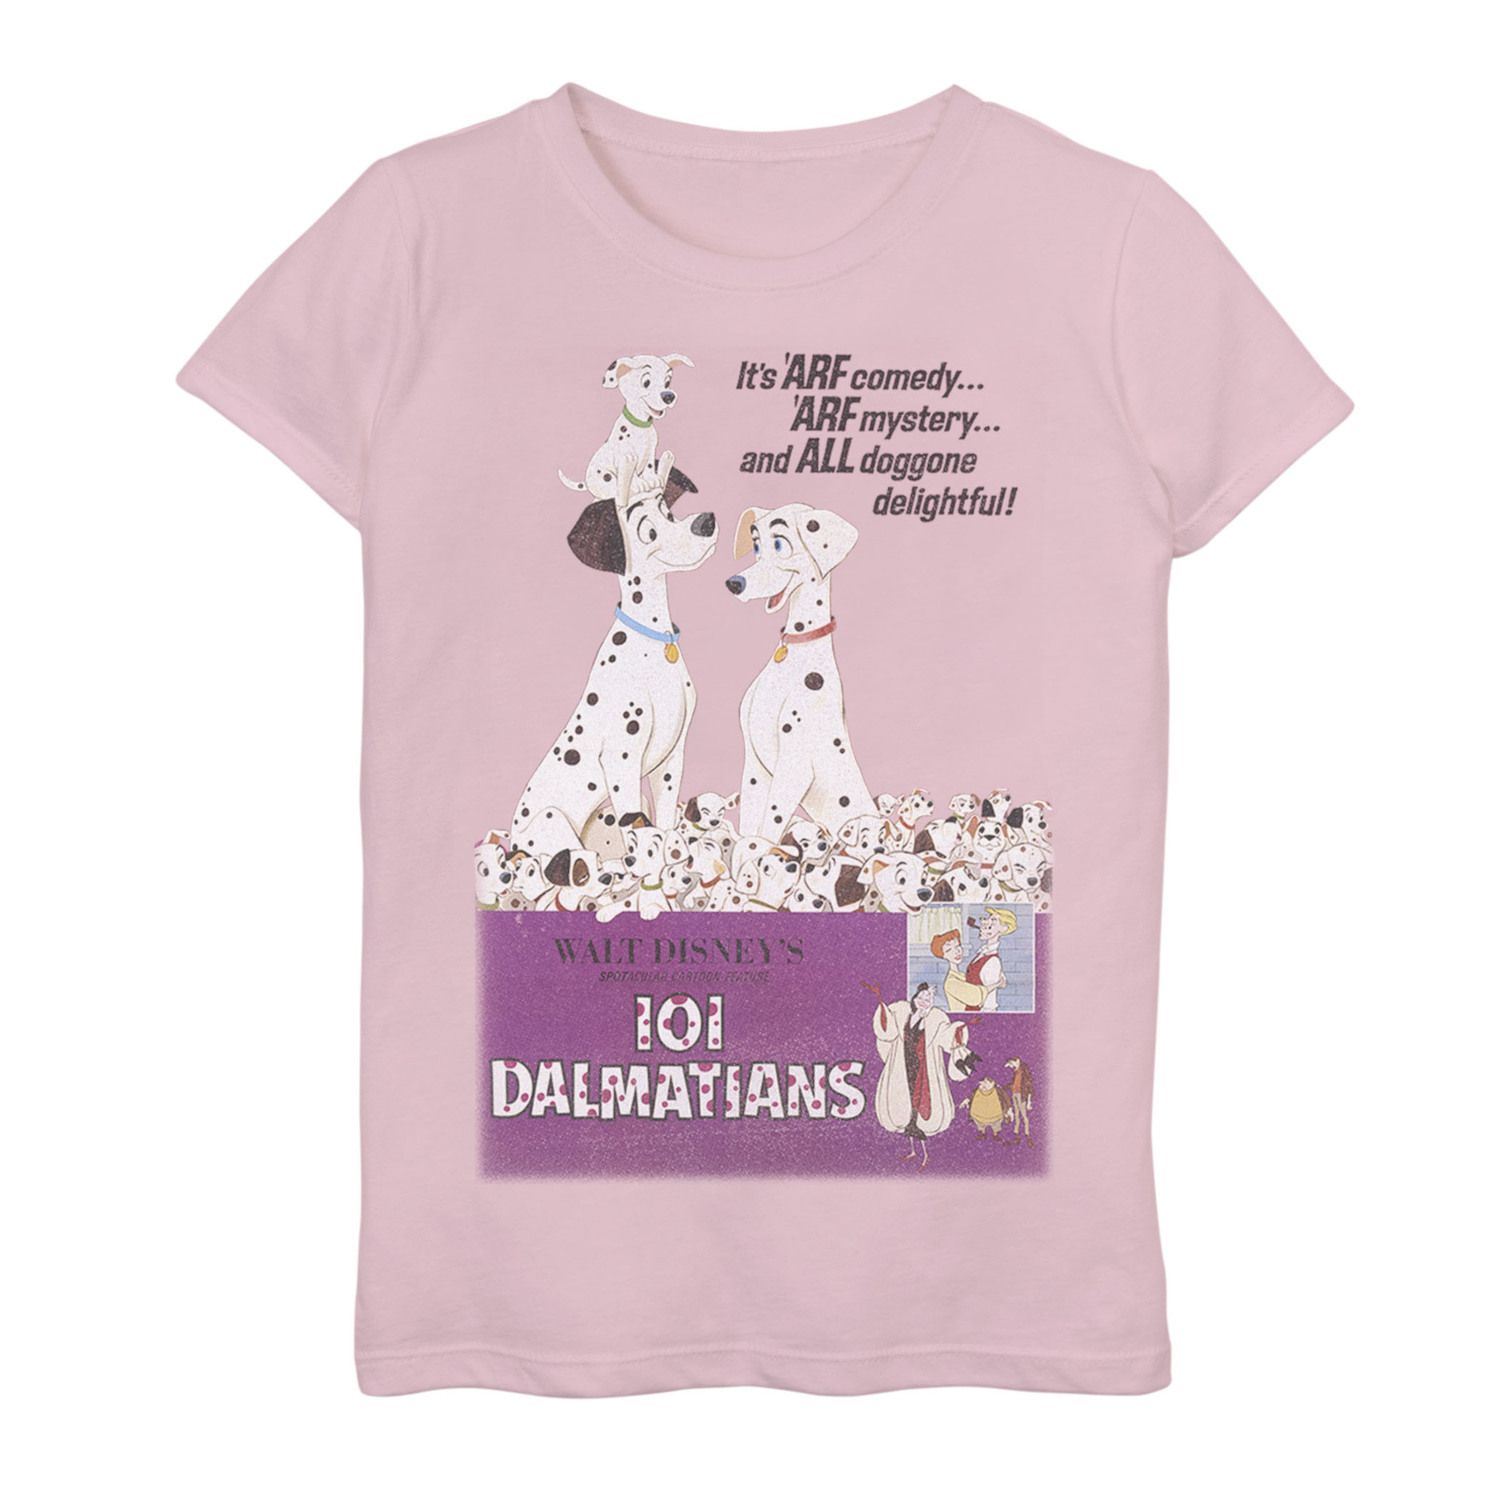 Image for Disney 's 101 Dalmatians Girls 7-16 Vintage Poster Variant Poster Graphic Tee at Kohl's.